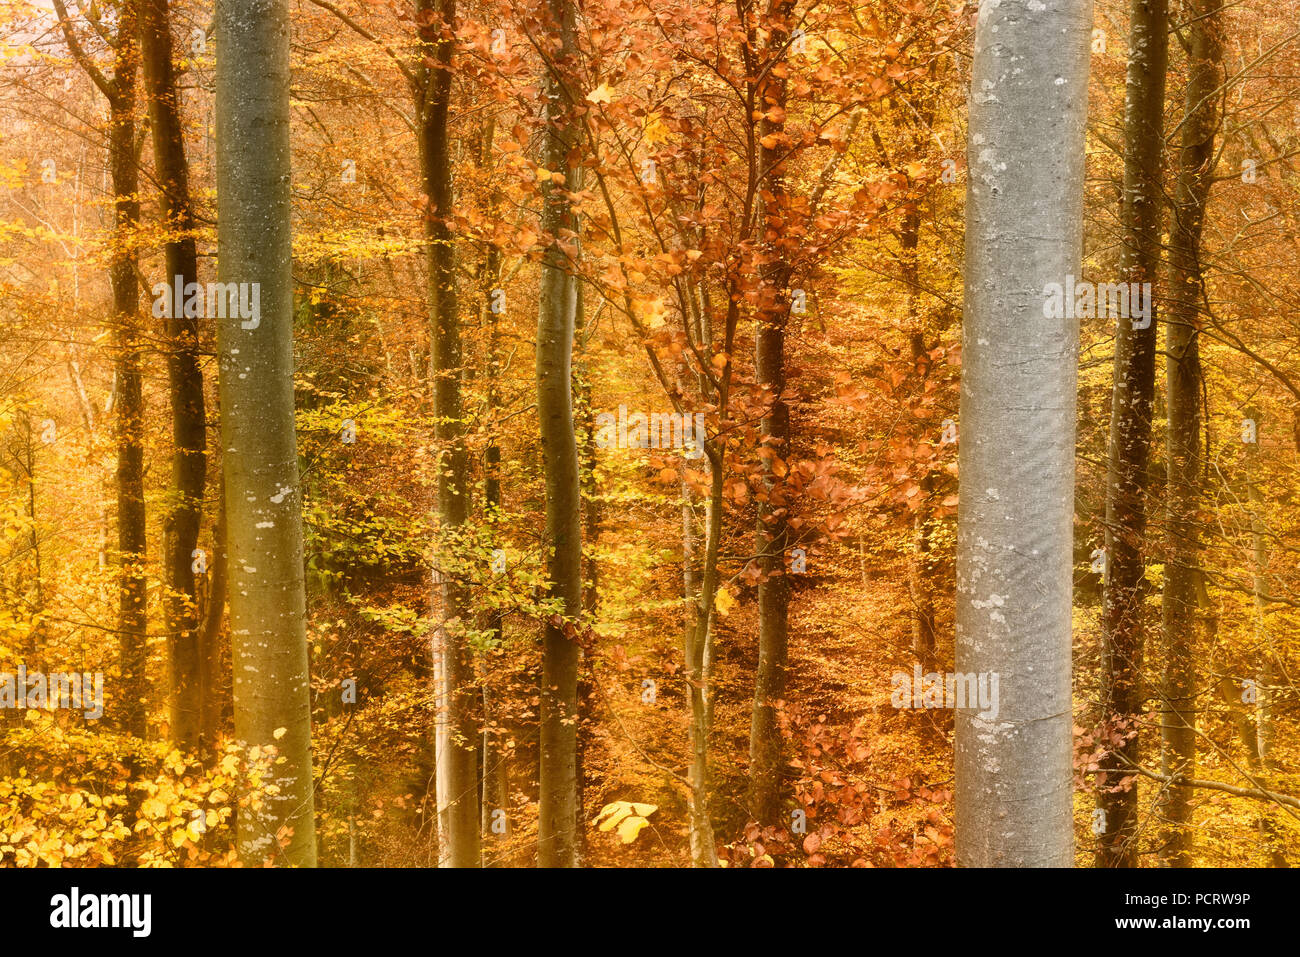 Colourful beech tree forest in autumn Stock Photo